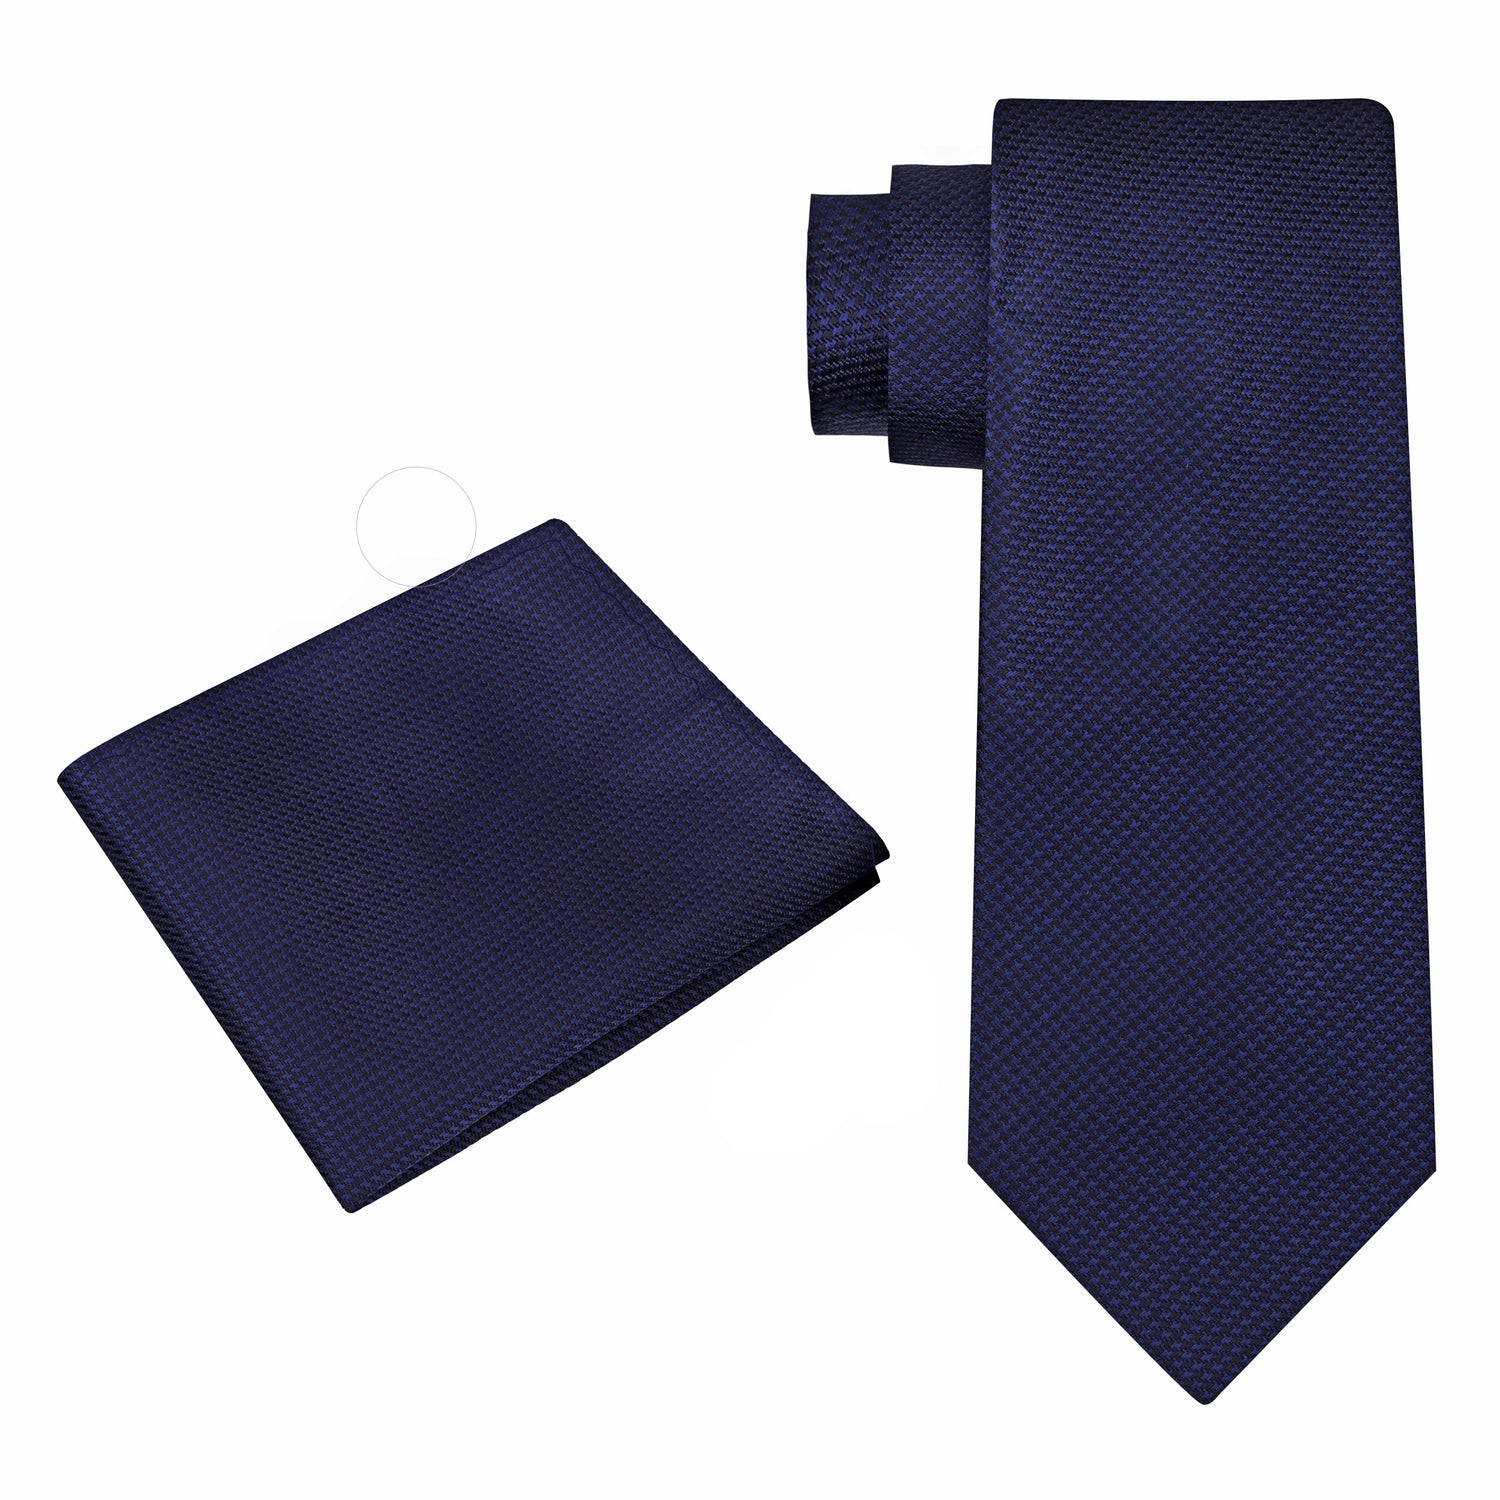 Alt View: Blue and Black Hounds Tooth Tie and Square